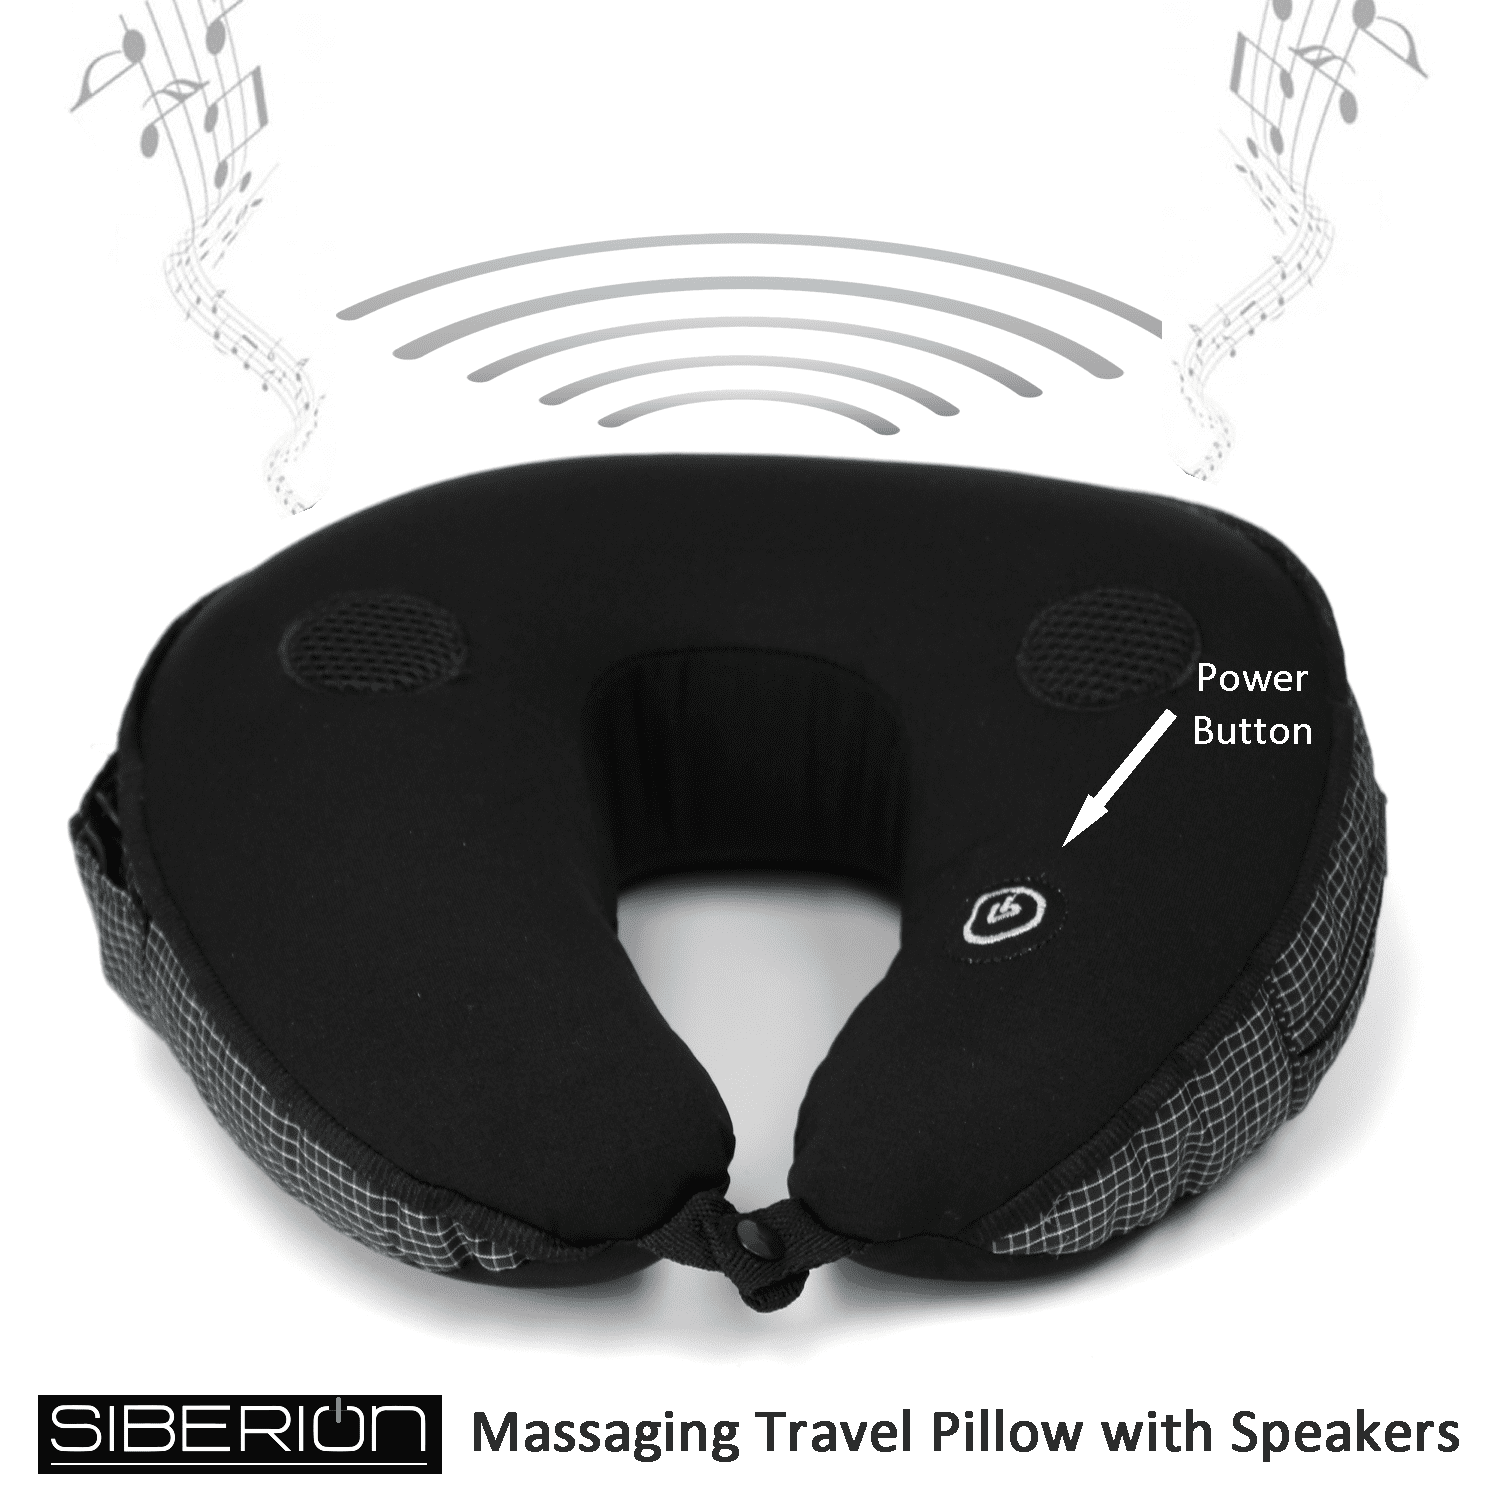 Fabric Blue Vibrating Microbead Neck Massage Travel Pillow For Home, Office